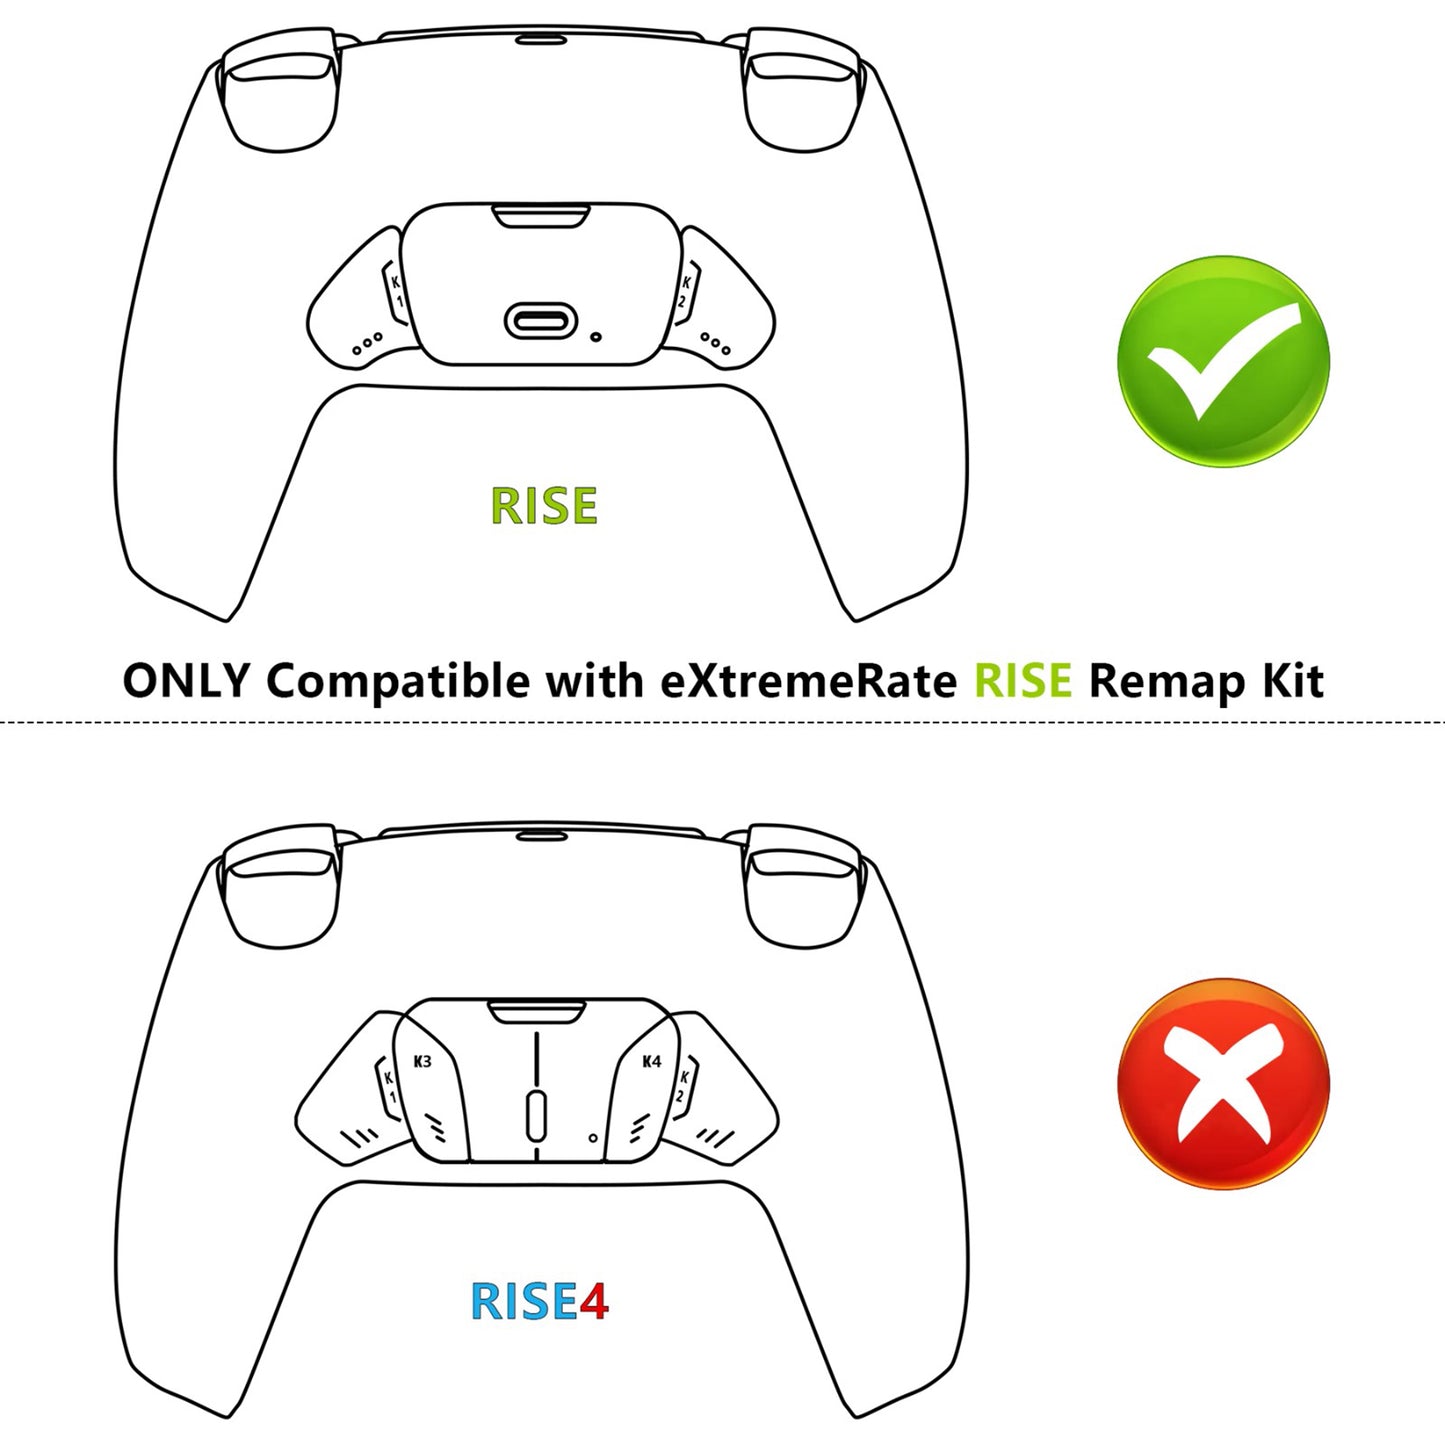 eXtremeRate Replacement Redesigned K1 K2 Back Buttons for eXtremerate RISE Remap Kit, Compatible with PS5 Controller - Clear Atomic Purple eXtremeRate